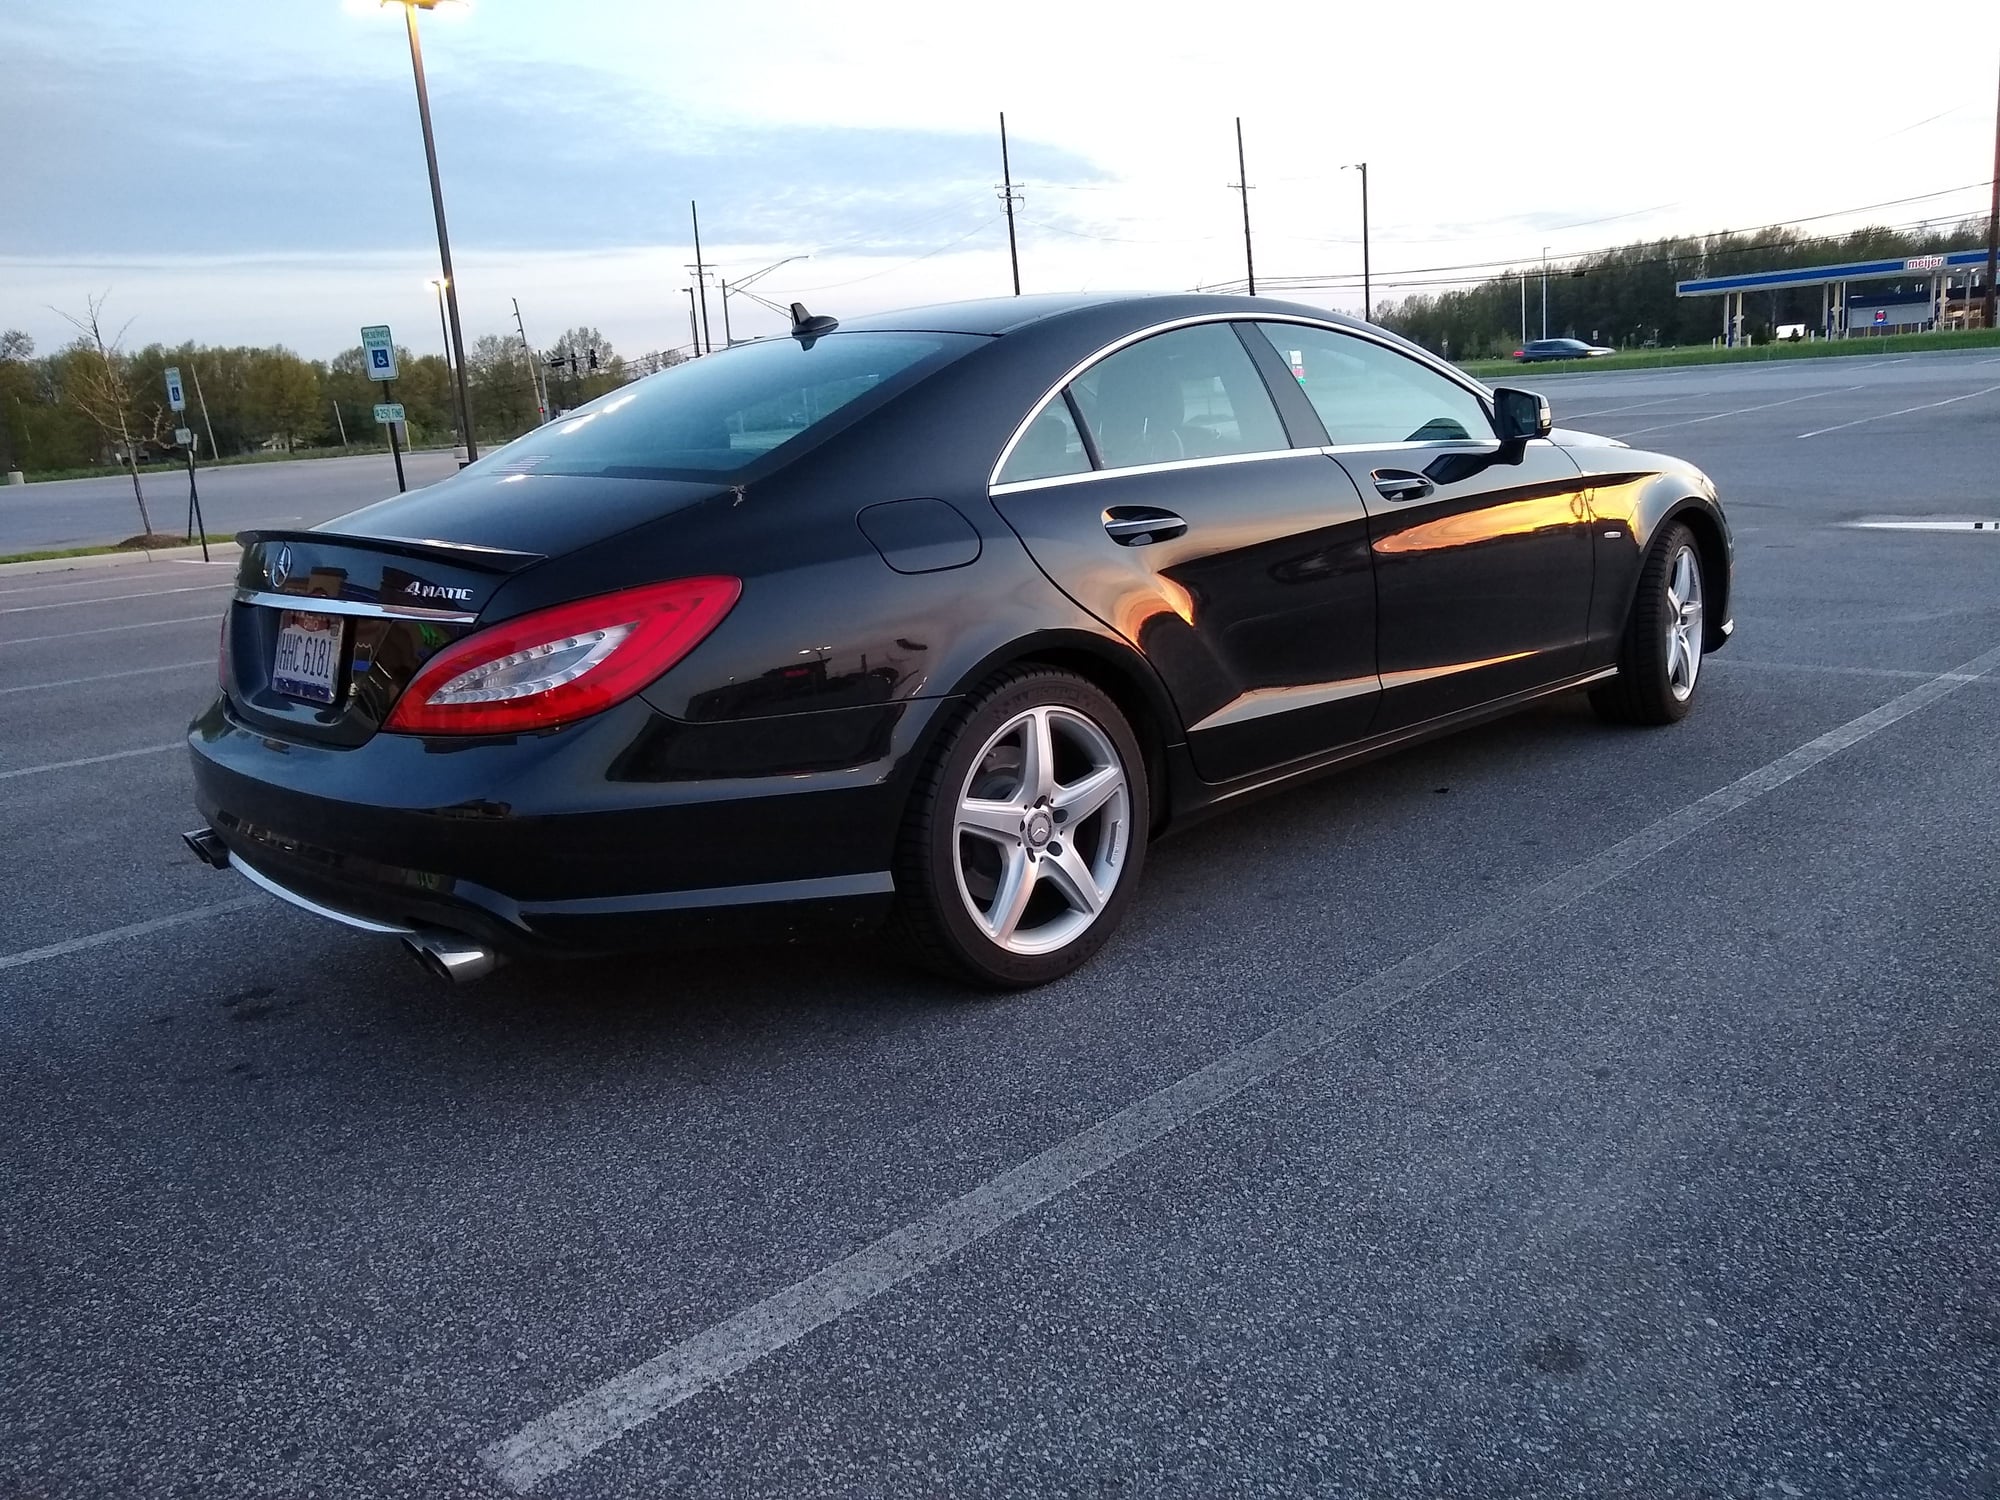 2012 Mercedes-Benz CLS550 - Beautiful 2012 Black Mercedes CLS550 4Matic with Renntech Tune Still Under CPO Wrty - Used - VIN wddlj9bb5ca031889 - 95,000 Miles - 8 cyl - AWD - Automatic - Sedan - Black - North Olmsted, OH 44070, United States